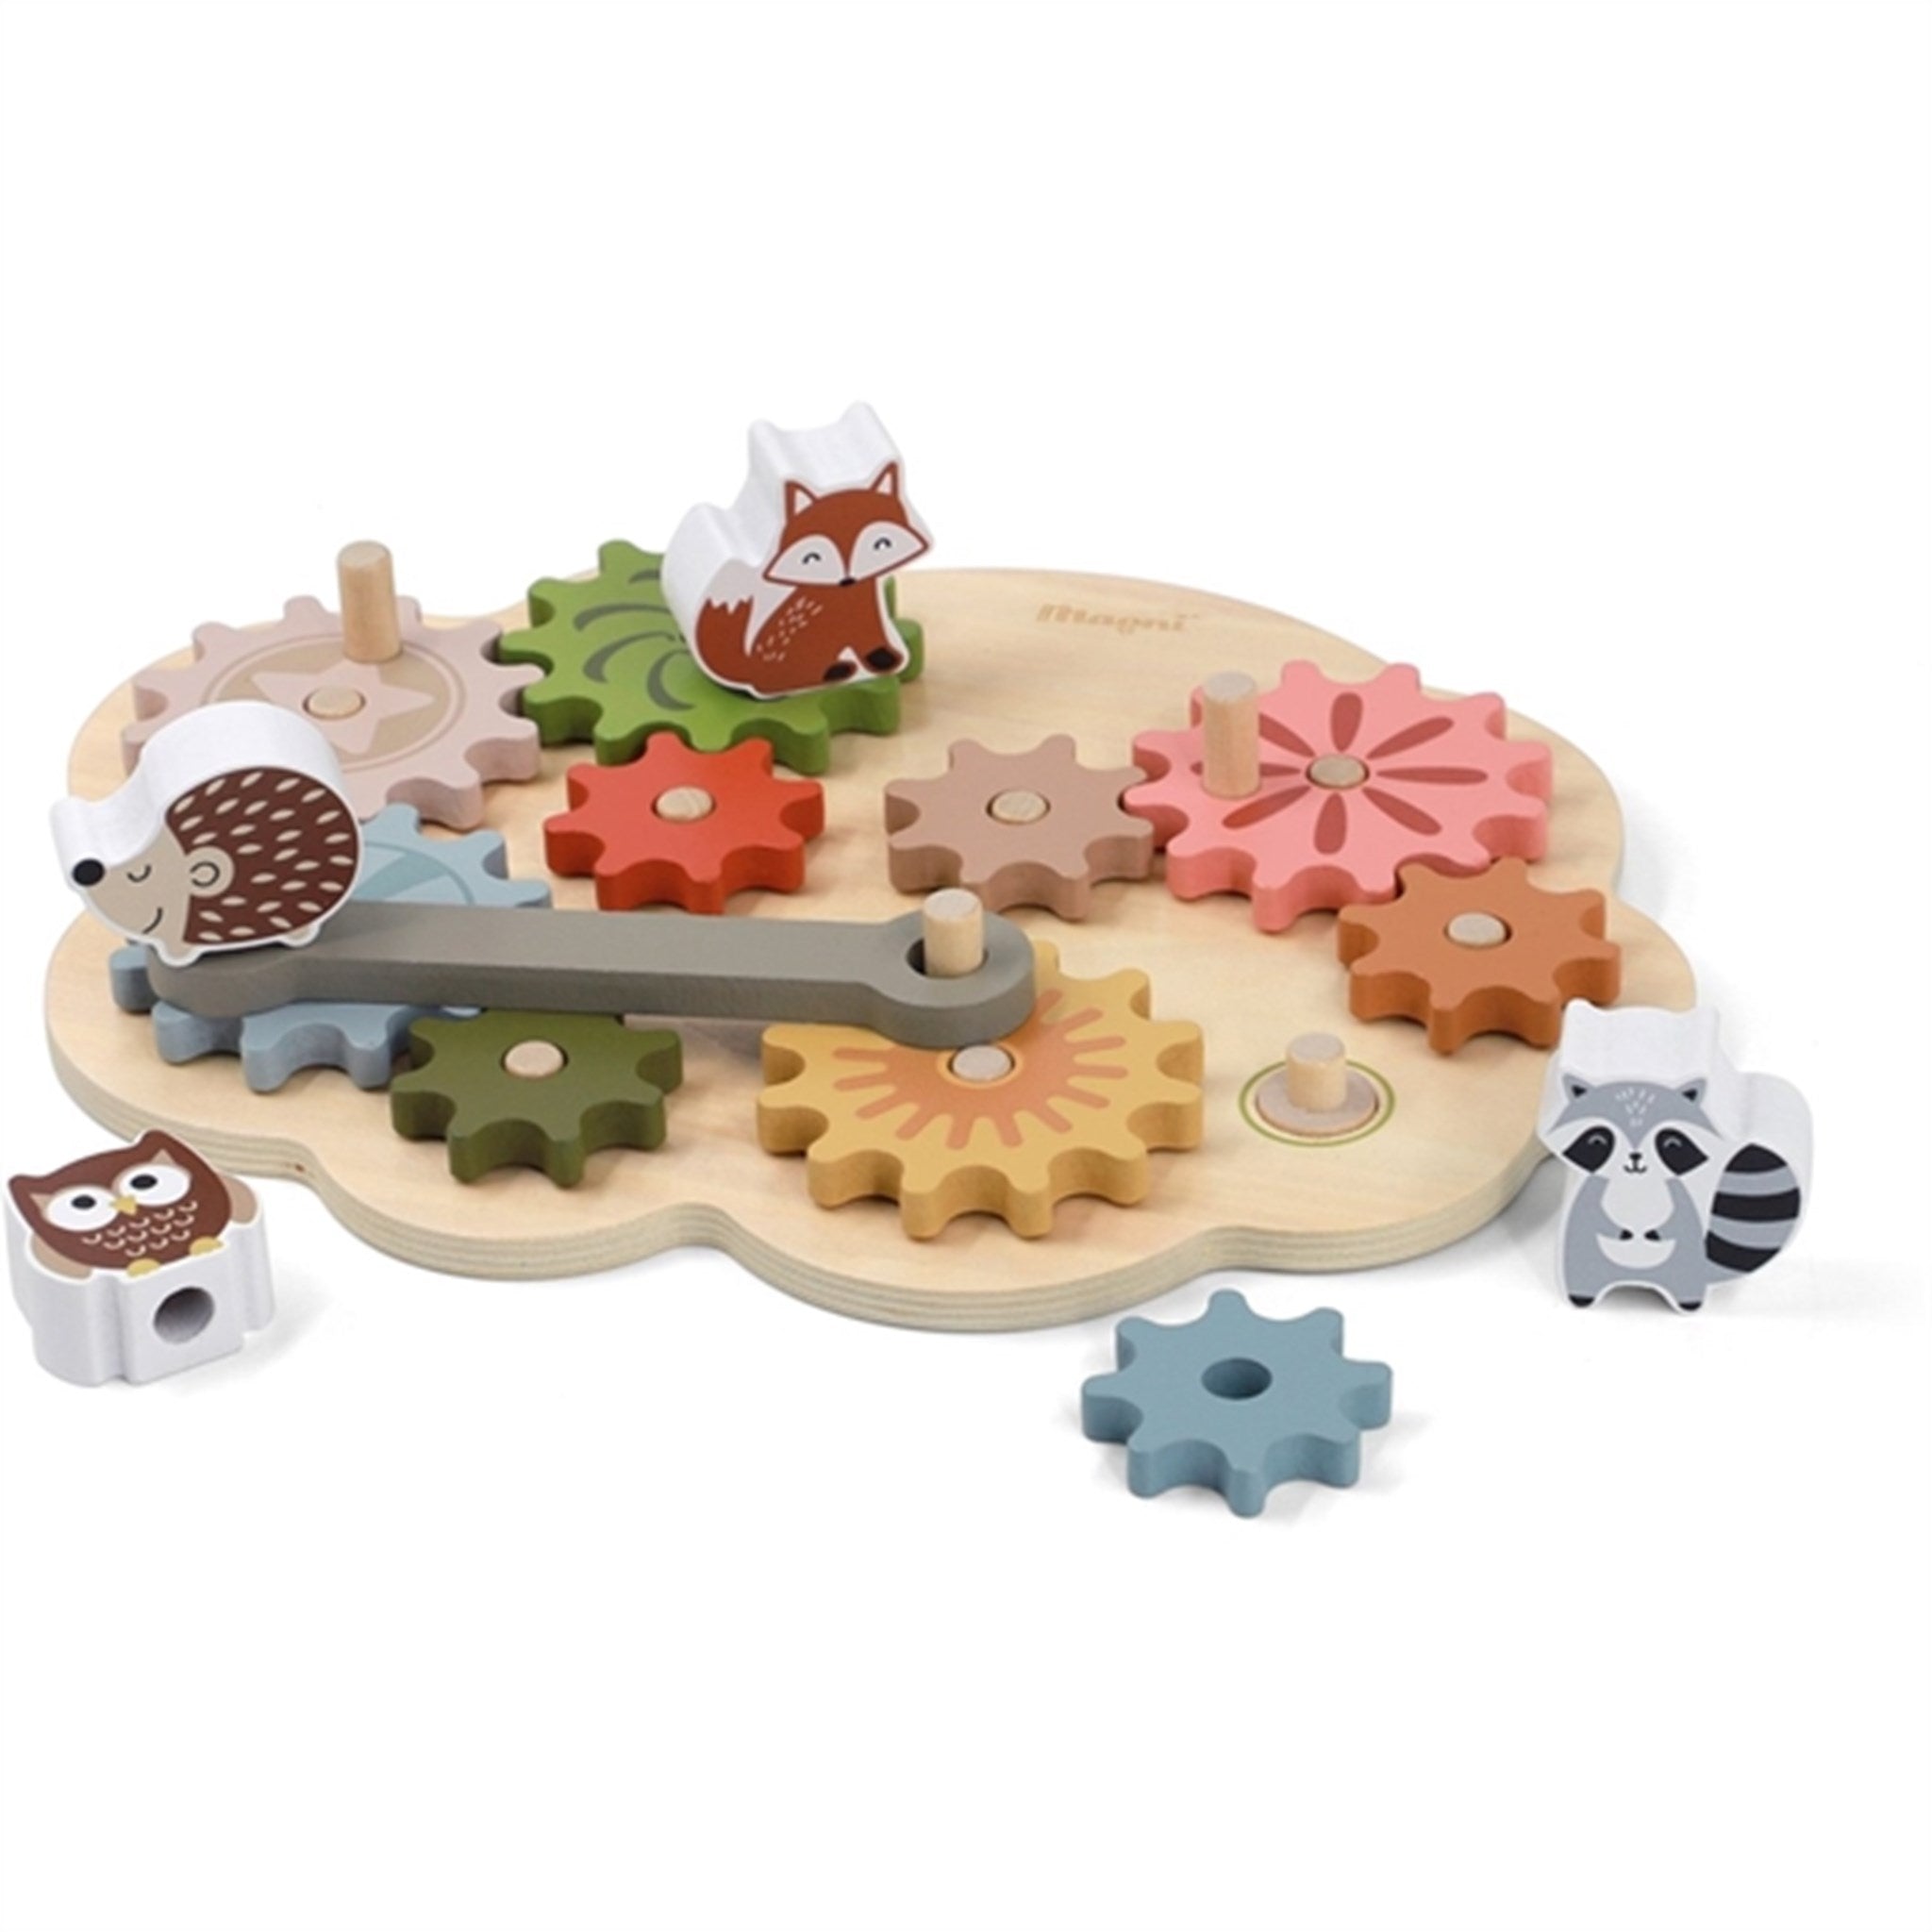 Magni Activity Board With Gears And Animals